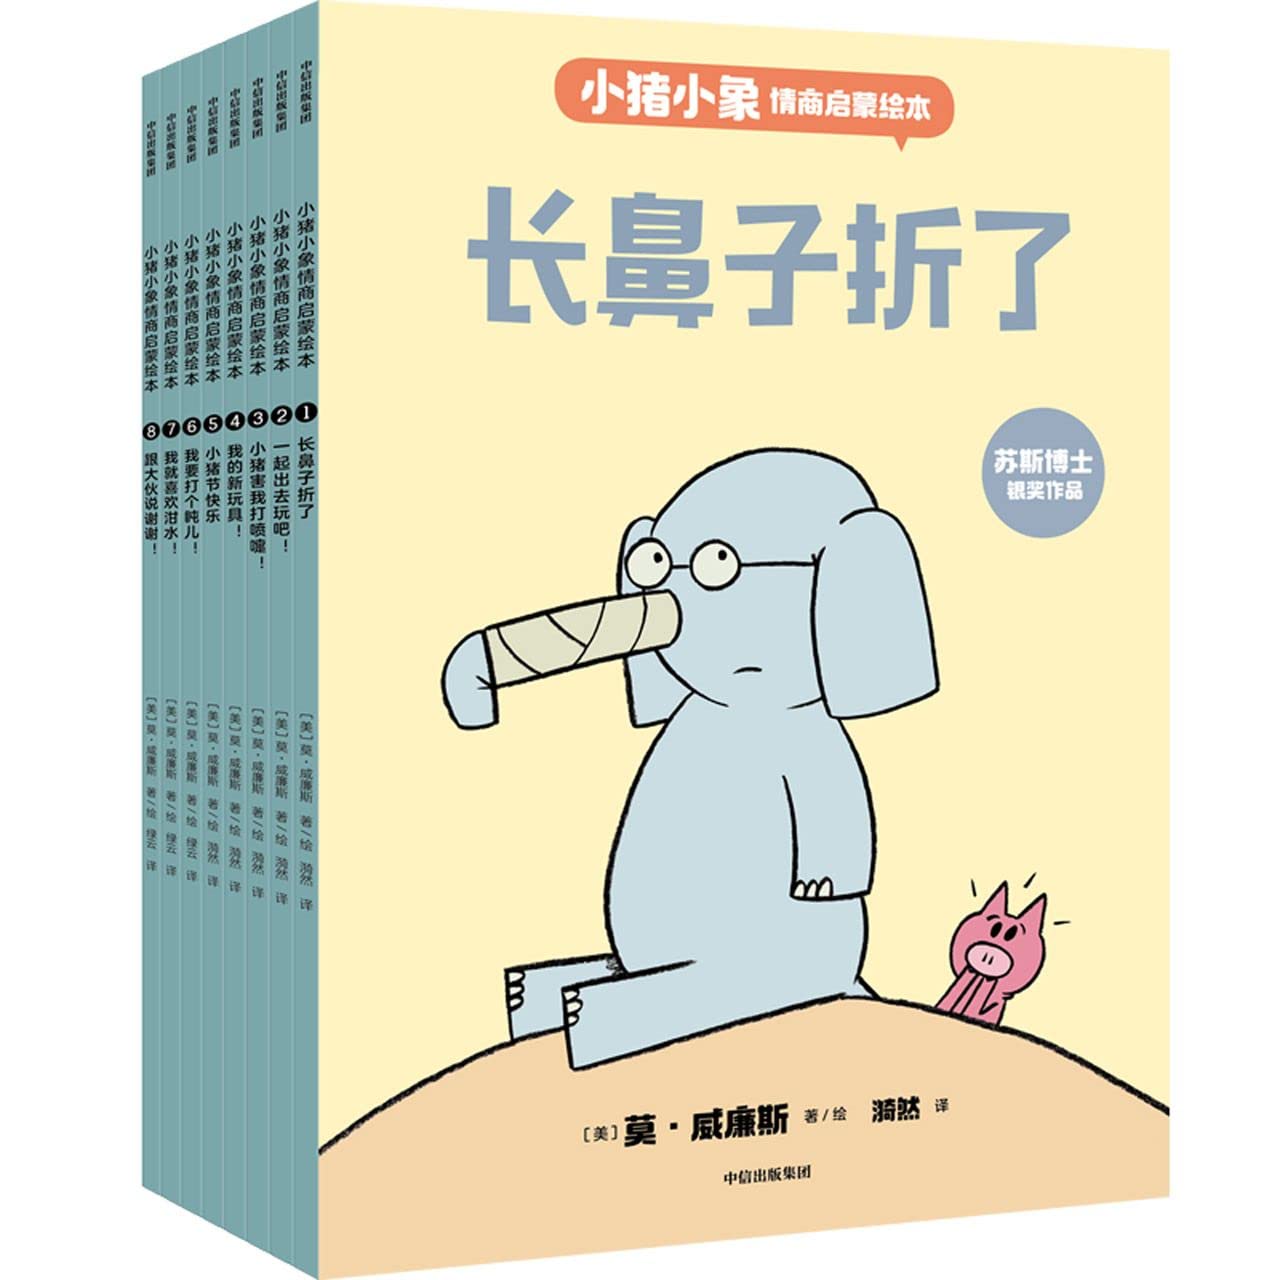 An Elephant and Piggie Book (8 Volumes) (Chinese Edition)